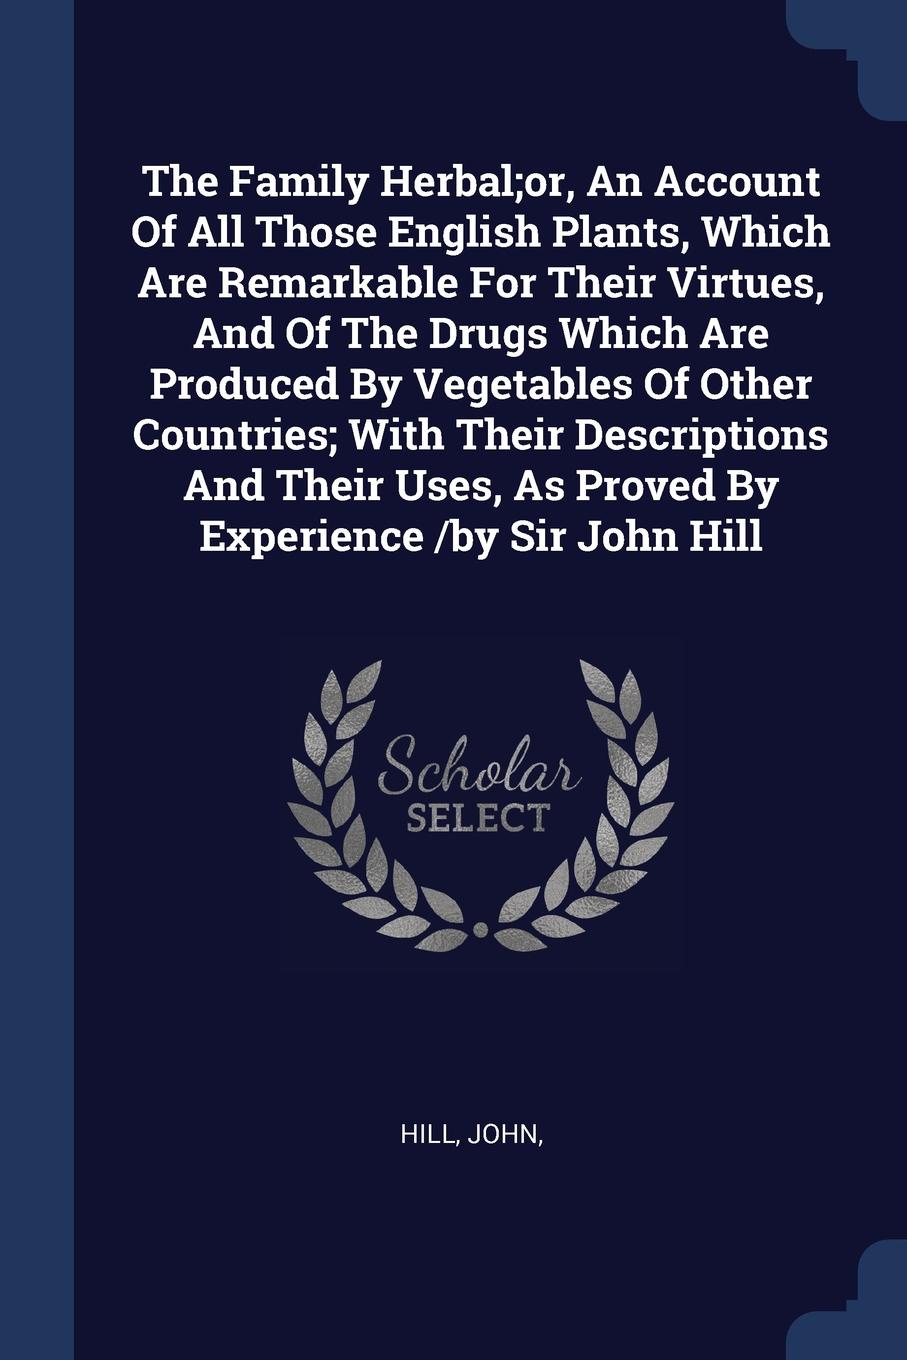 The Family Herbal;or, An Account Of All Those English Plants, Which Are Remarkable For Their Virtues, And Of The Drugs Which Are Produced By Vegetables Of Other Countries; With Their Descriptions And Their Uses, As Proved By Experience /by Sir Joh...